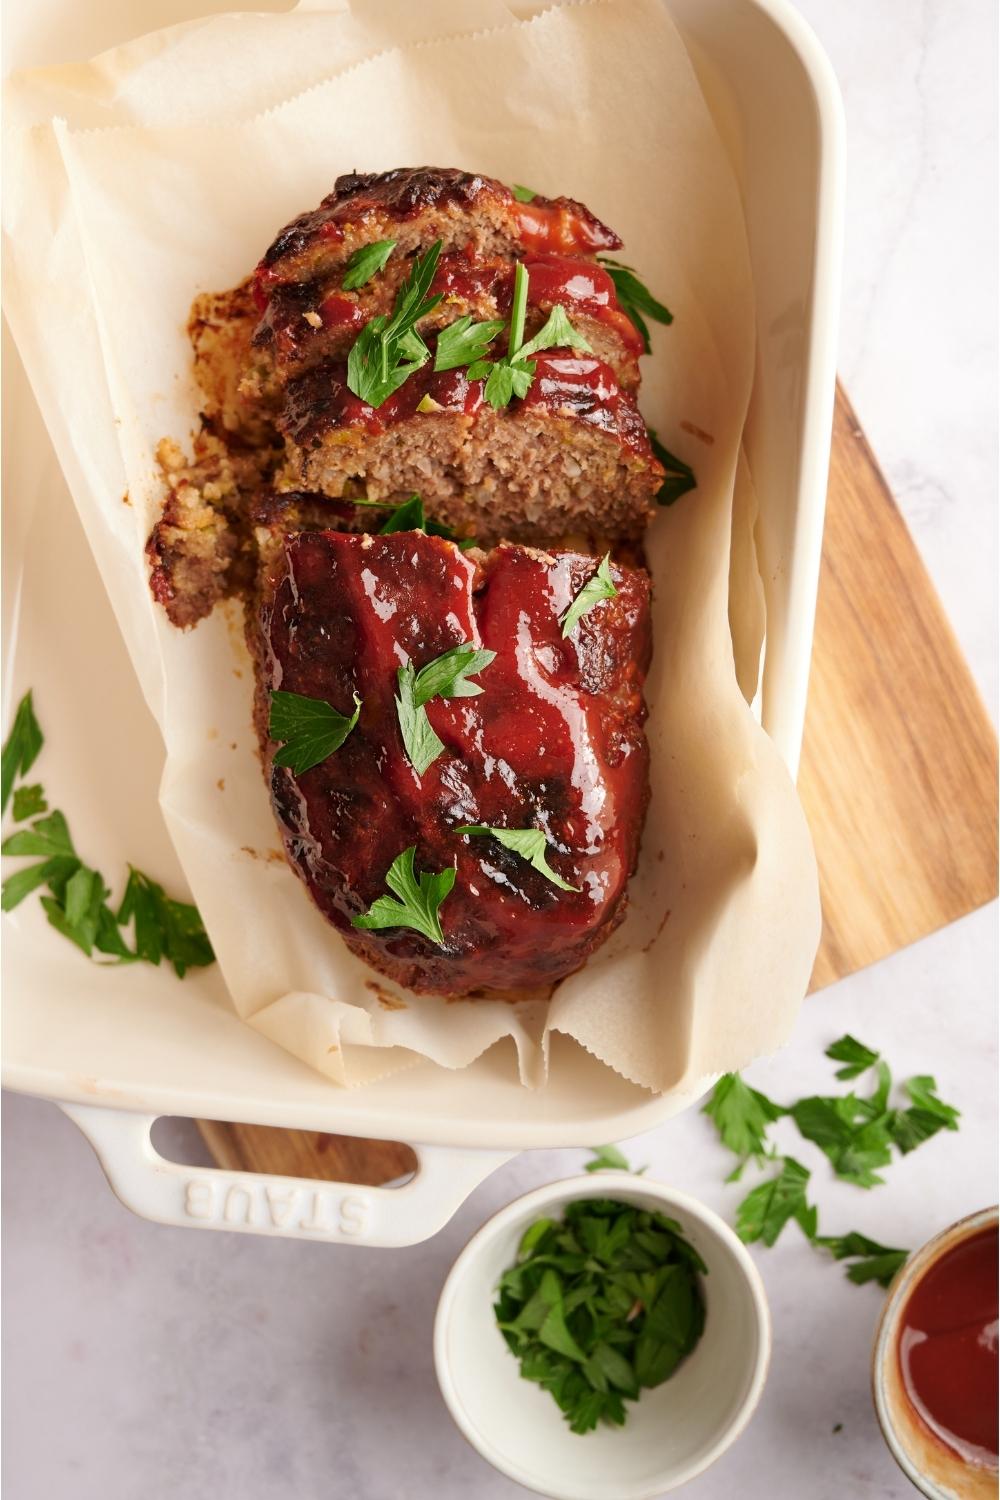 Southern meatloaf on parchment paper in a white baking dish. The dish is resting on a wood cutting board. Half of the meatloaf has been sliced to serve and the meatloaf is garnished with fresh parsley. A half-empty bowl of parsley is next to the meatloaf.